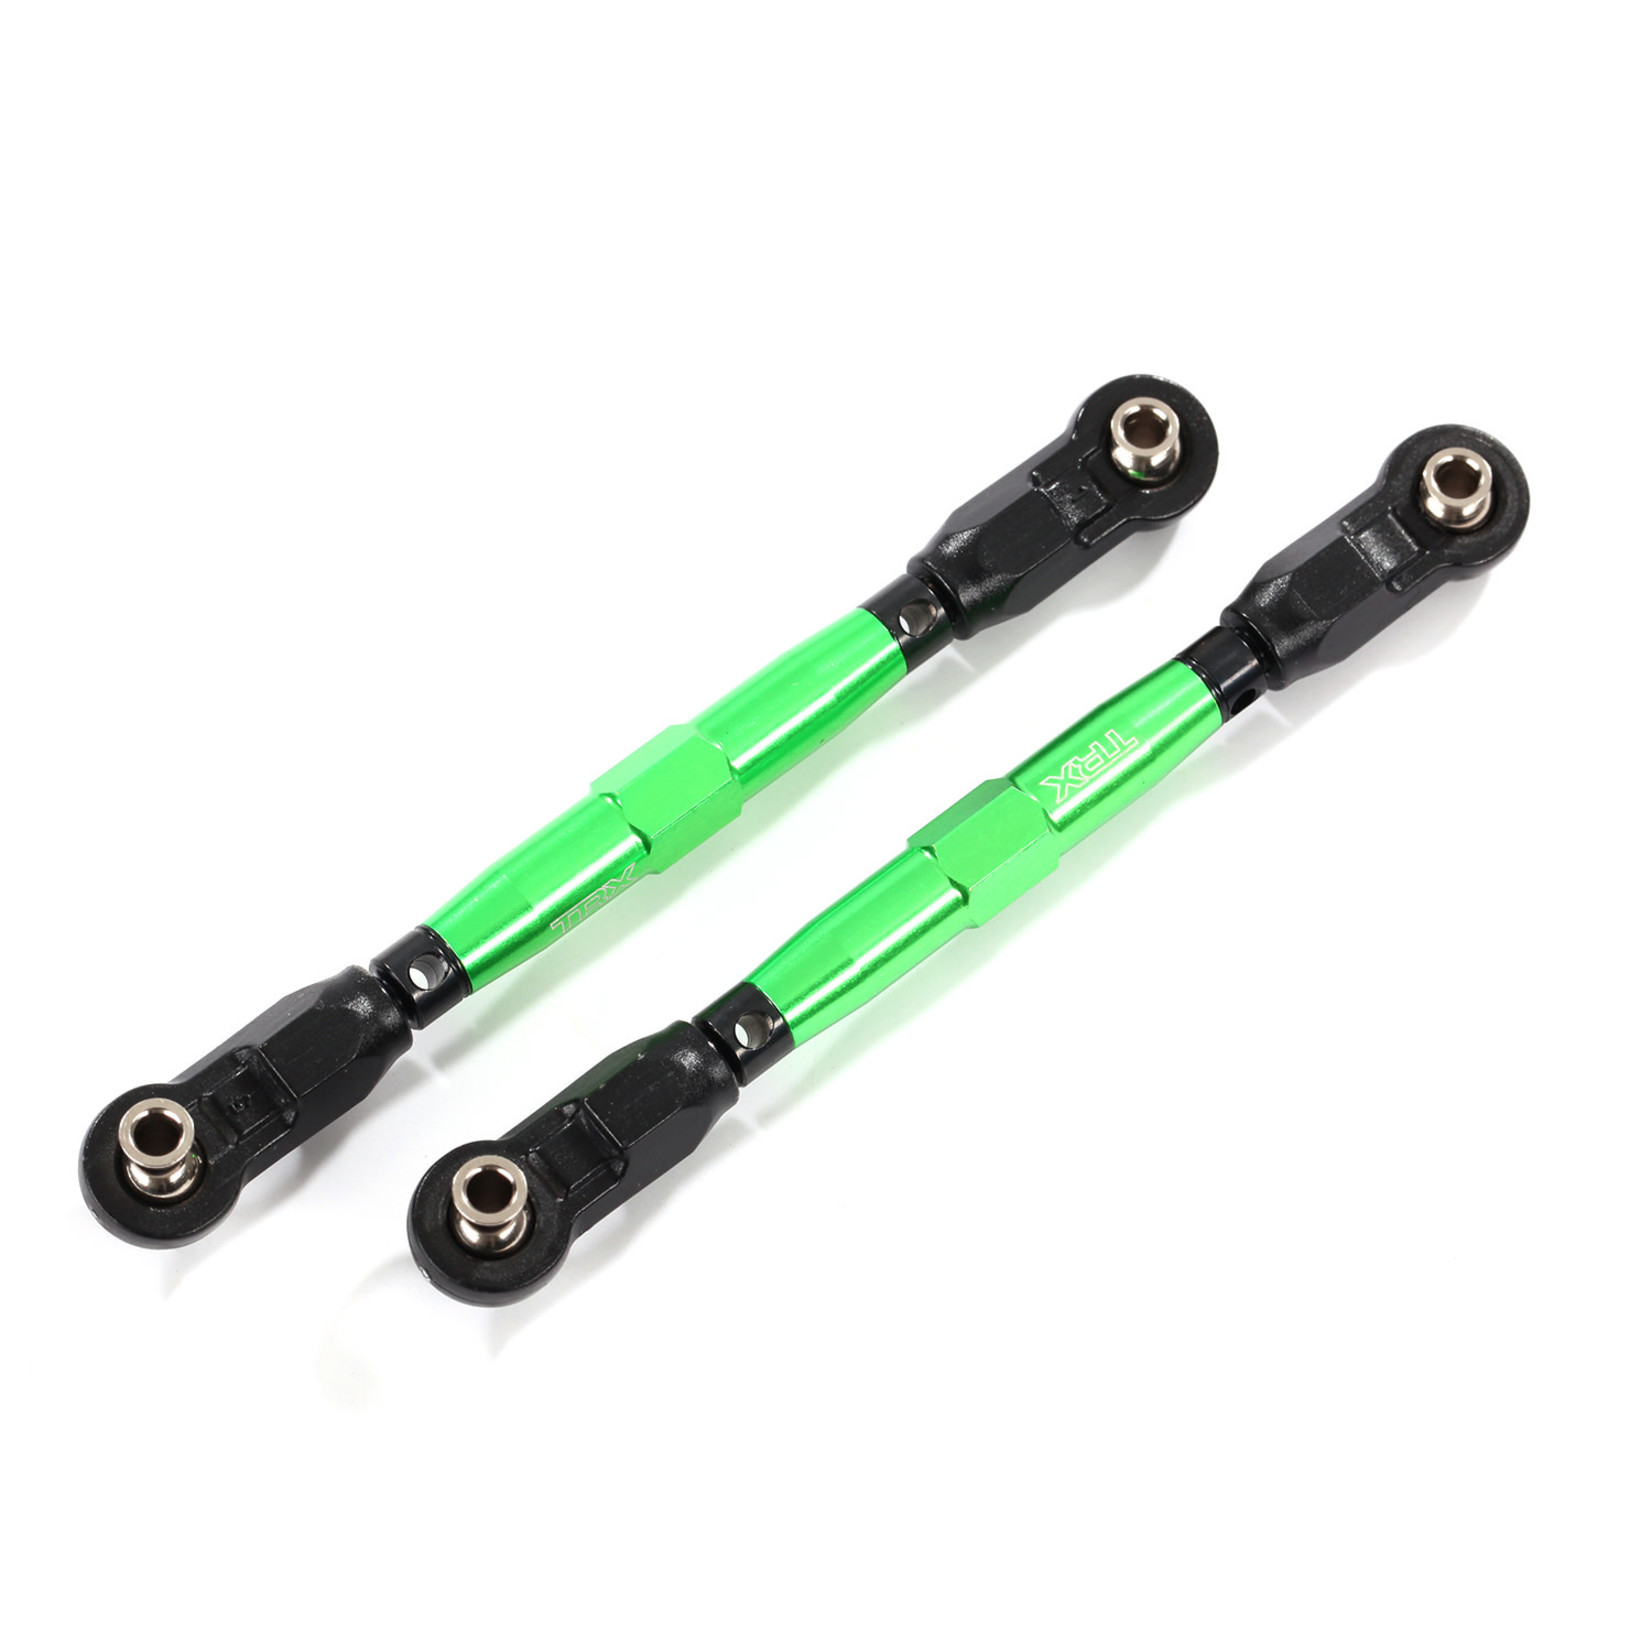 TRAXXAS Toe links, front (TUBES green-anodized, 7075-T6 aluminum, stronger than titanium) (88mm) (2)/ rod ends, rear (4)/ rod ends, front (4)/ aluminum wrench (1)